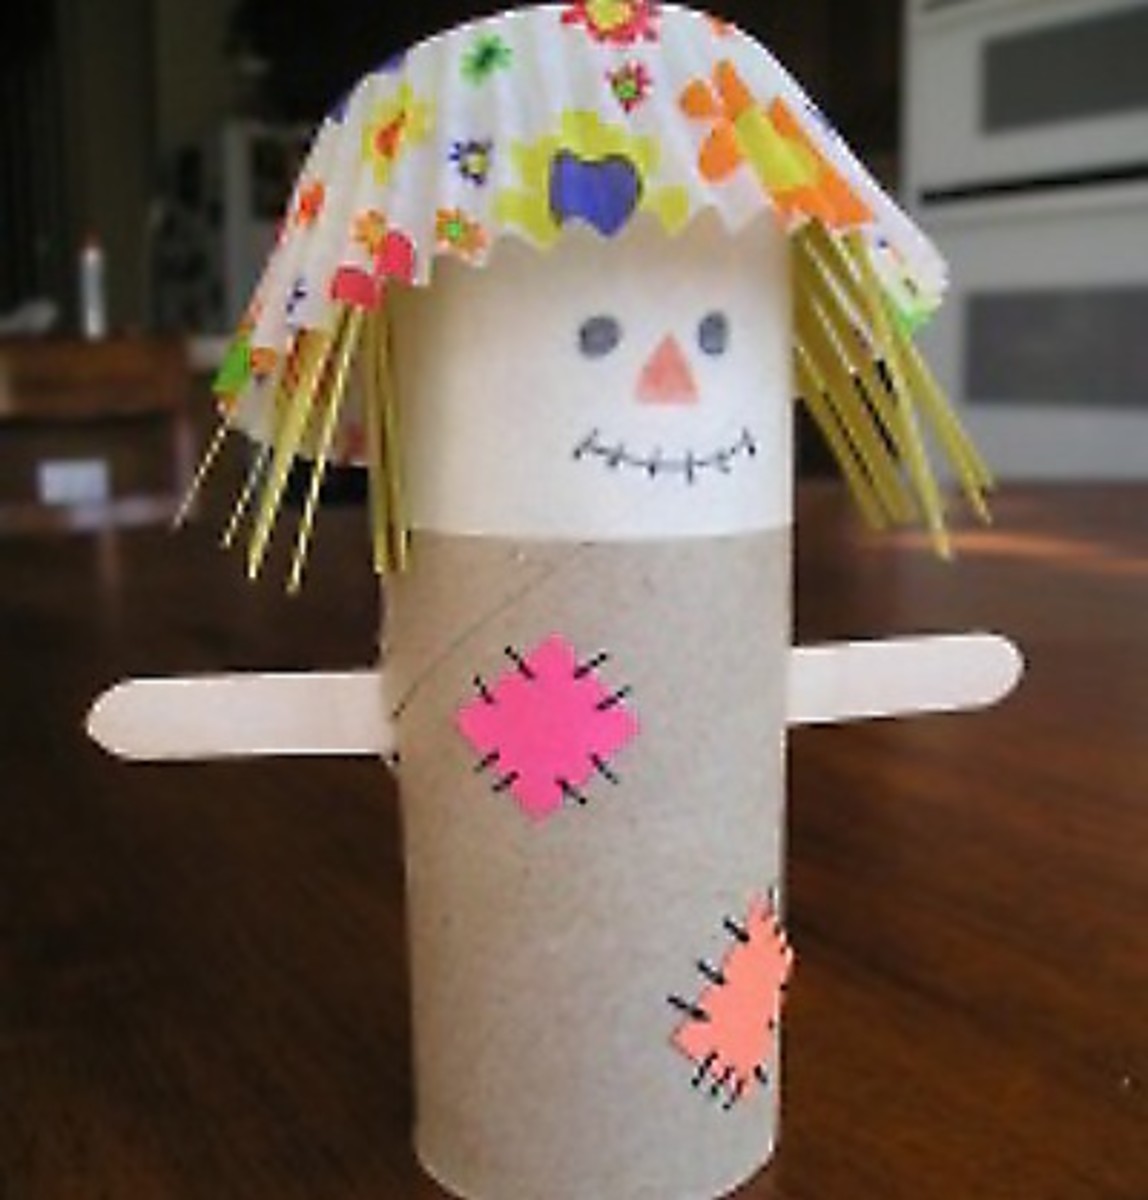 paper-roll-baby-dolls-the-triplets